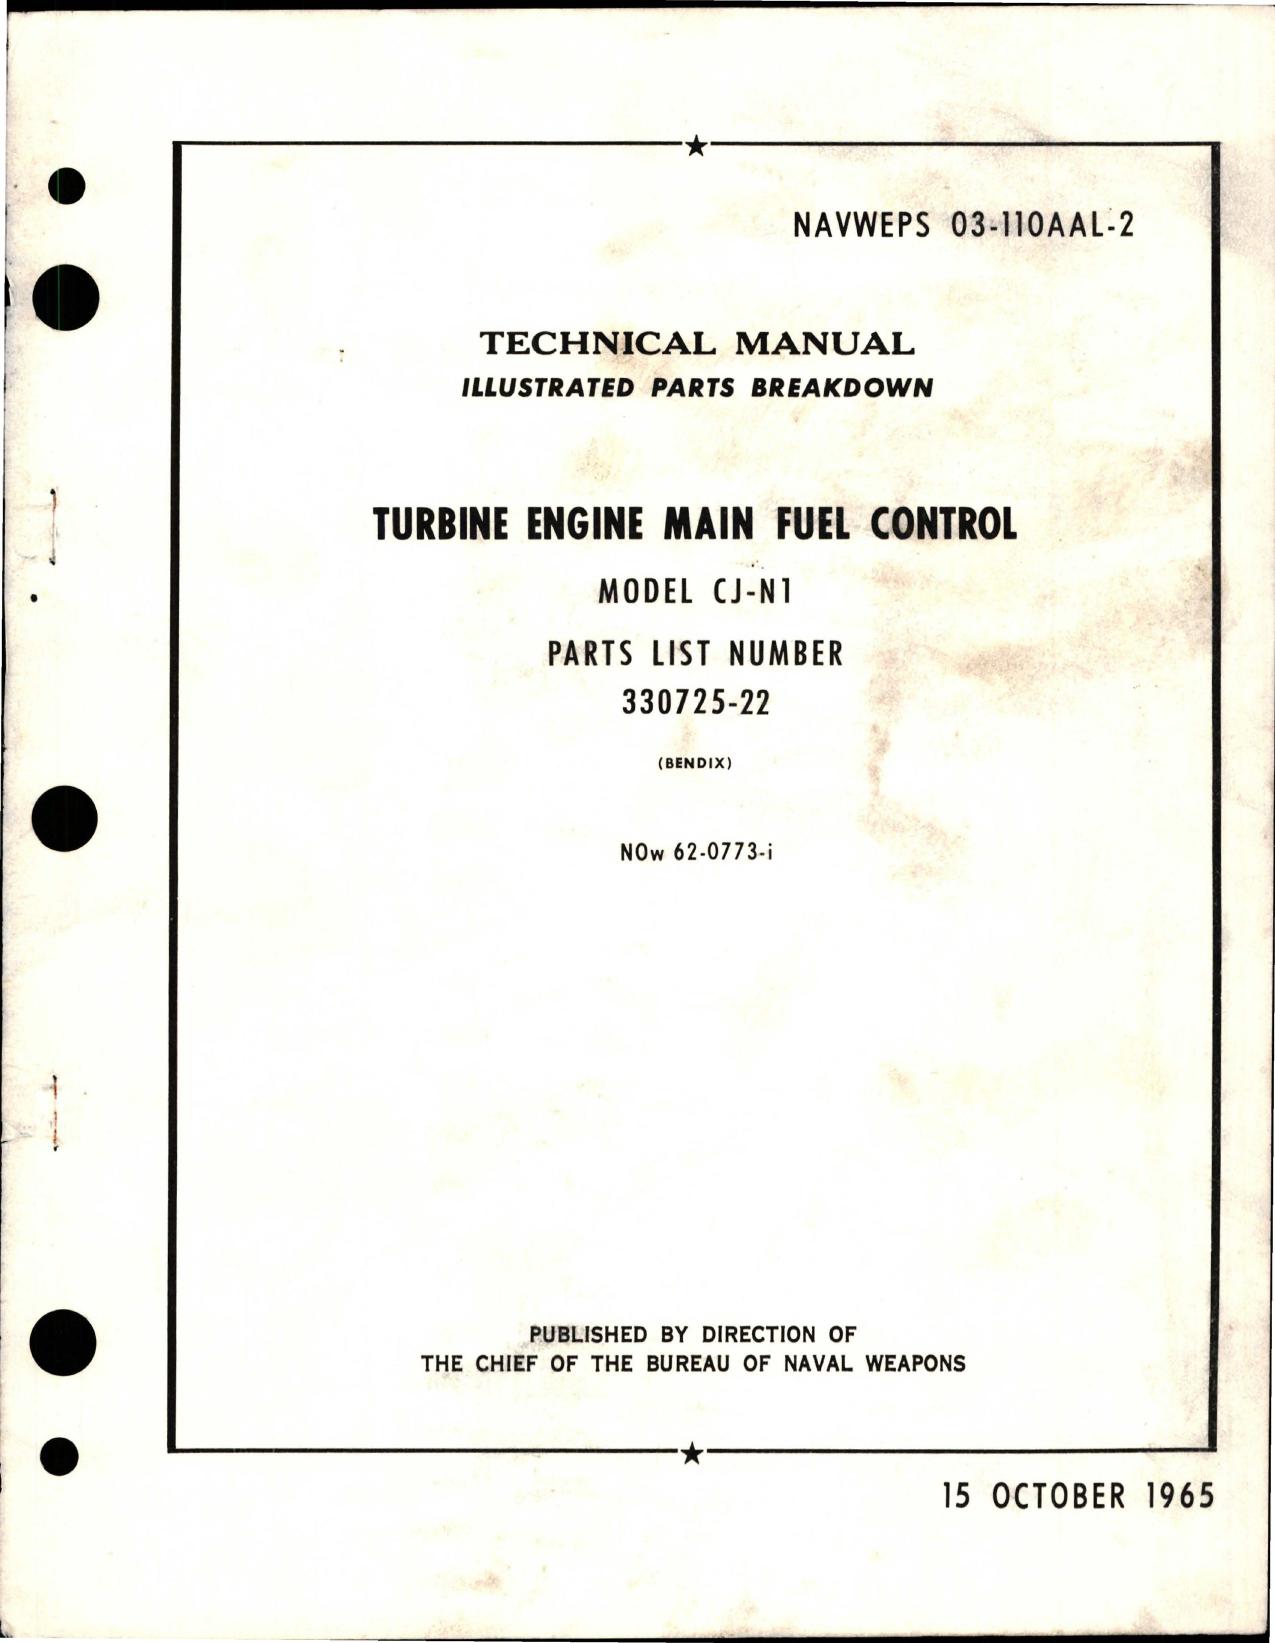 Sample page 1 from AirCorps Library document: Illustrated Parts Breakdown for Turbine Engine Main Fuel Control - Model CJ-N1 - Parts List 330725-22